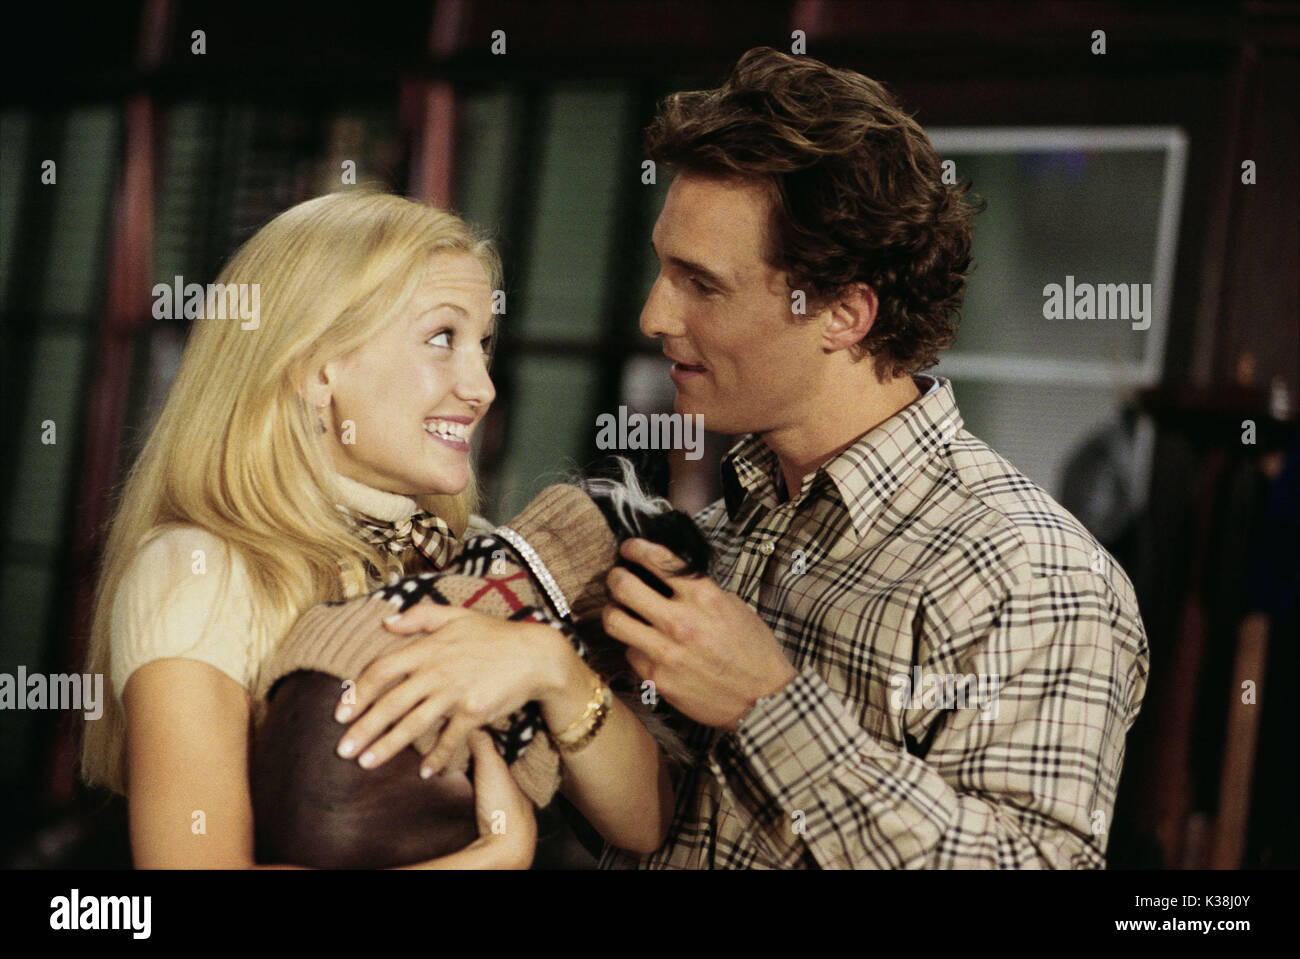 HOW TO LOSE A GUY IN 10 DAYS KATE HUDSON, MATTHEW MCCONAUGHEY     Date: 2003 Stock Photo